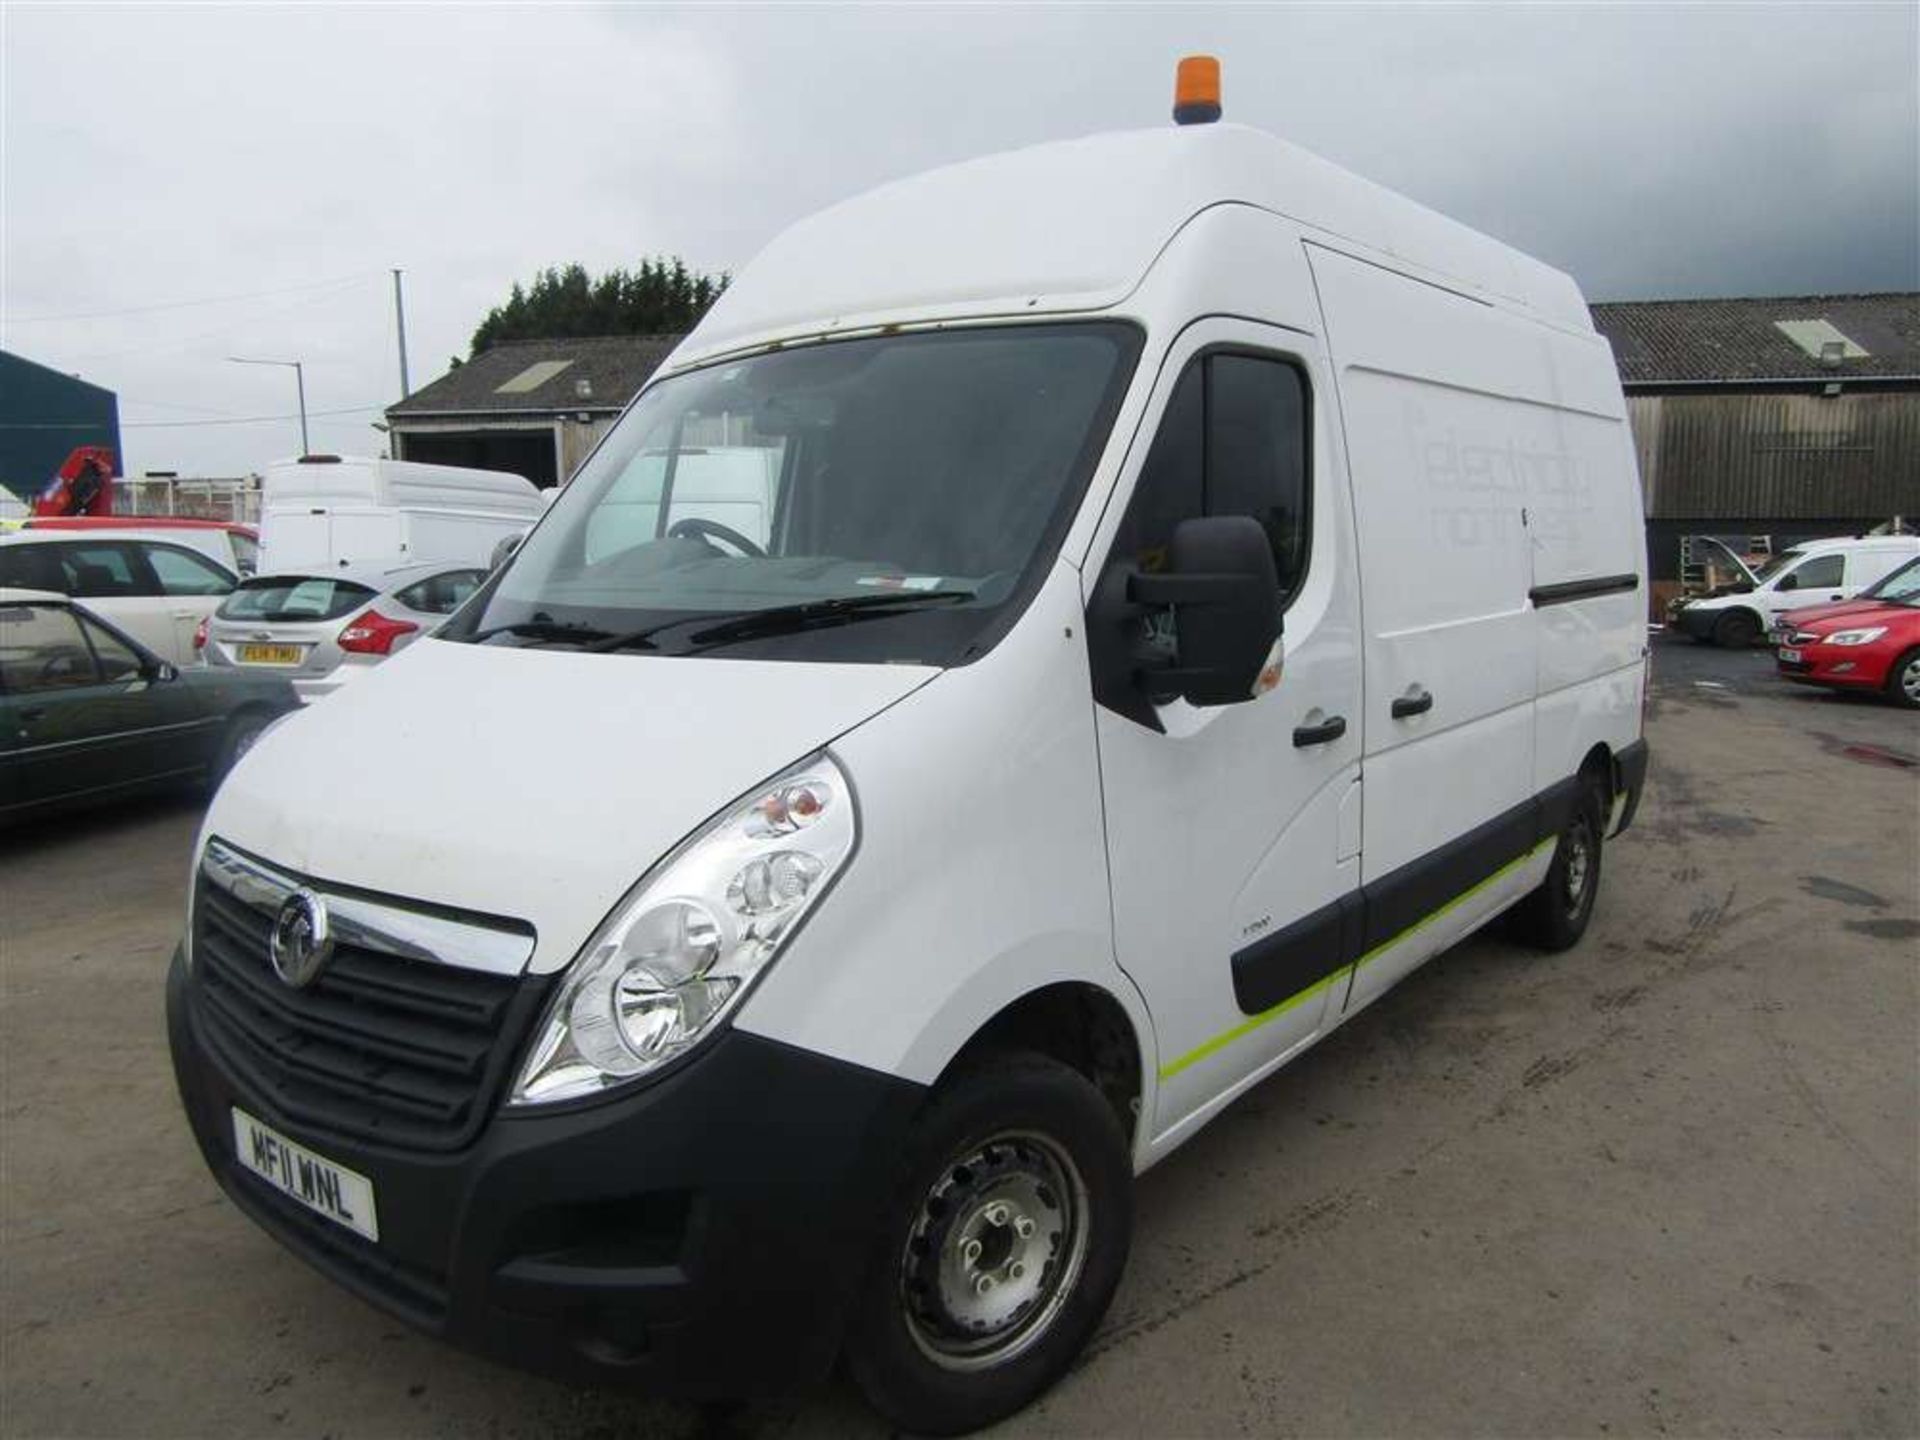 2011 11 reg Vauxhall Movano F3500 L2H3 (Direct Electricity North West) - Image 2 of 7